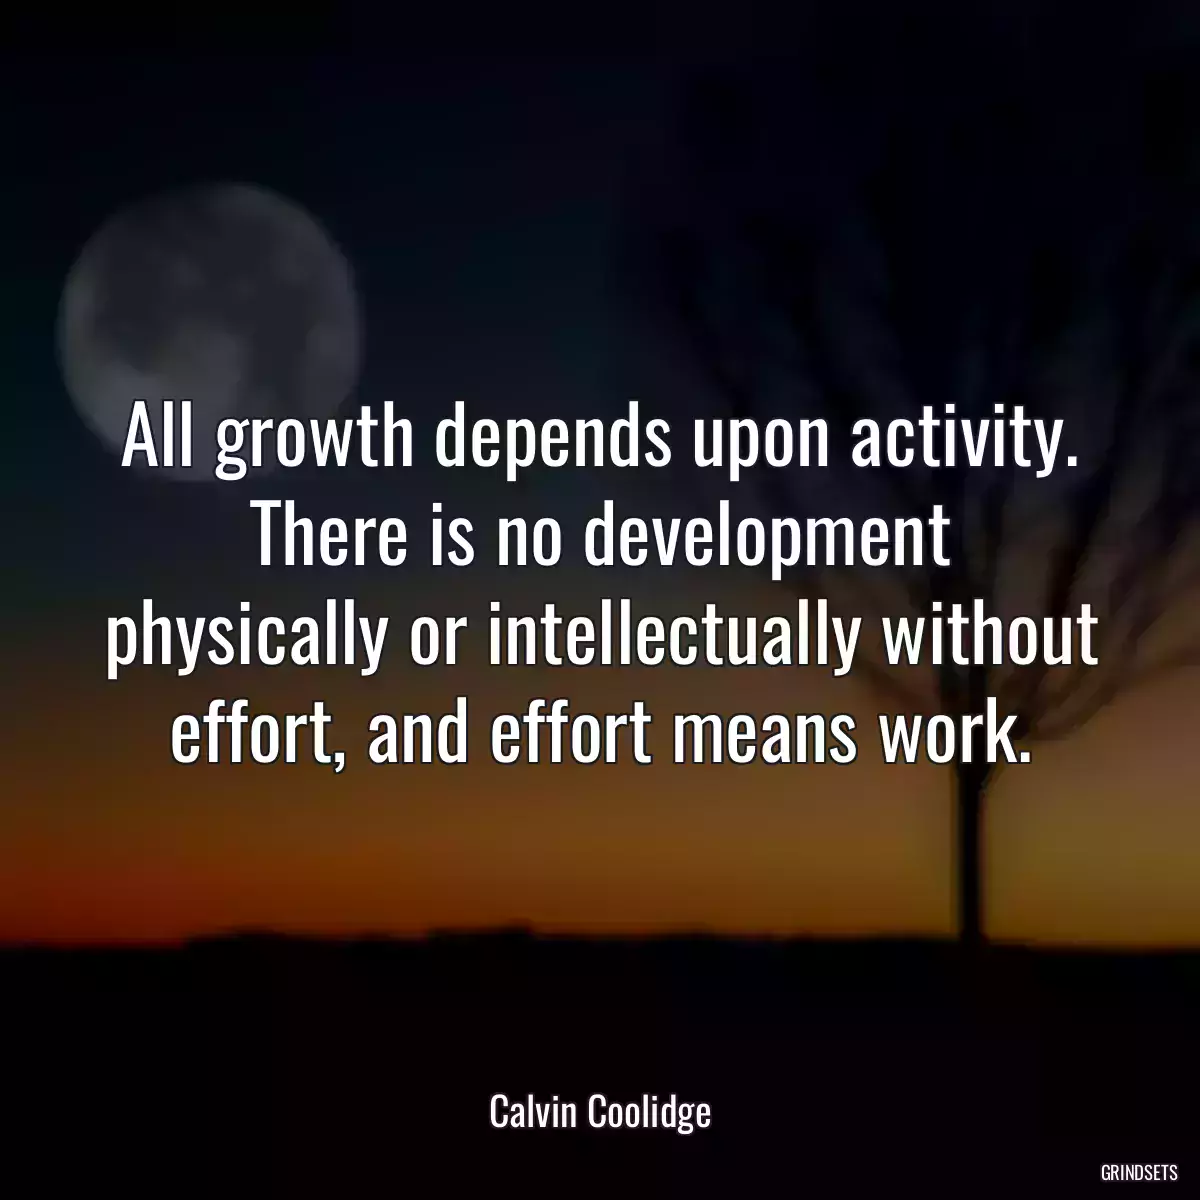 All growth depends upon activity. There is no development physically or intellectually without effort, and effort means work.